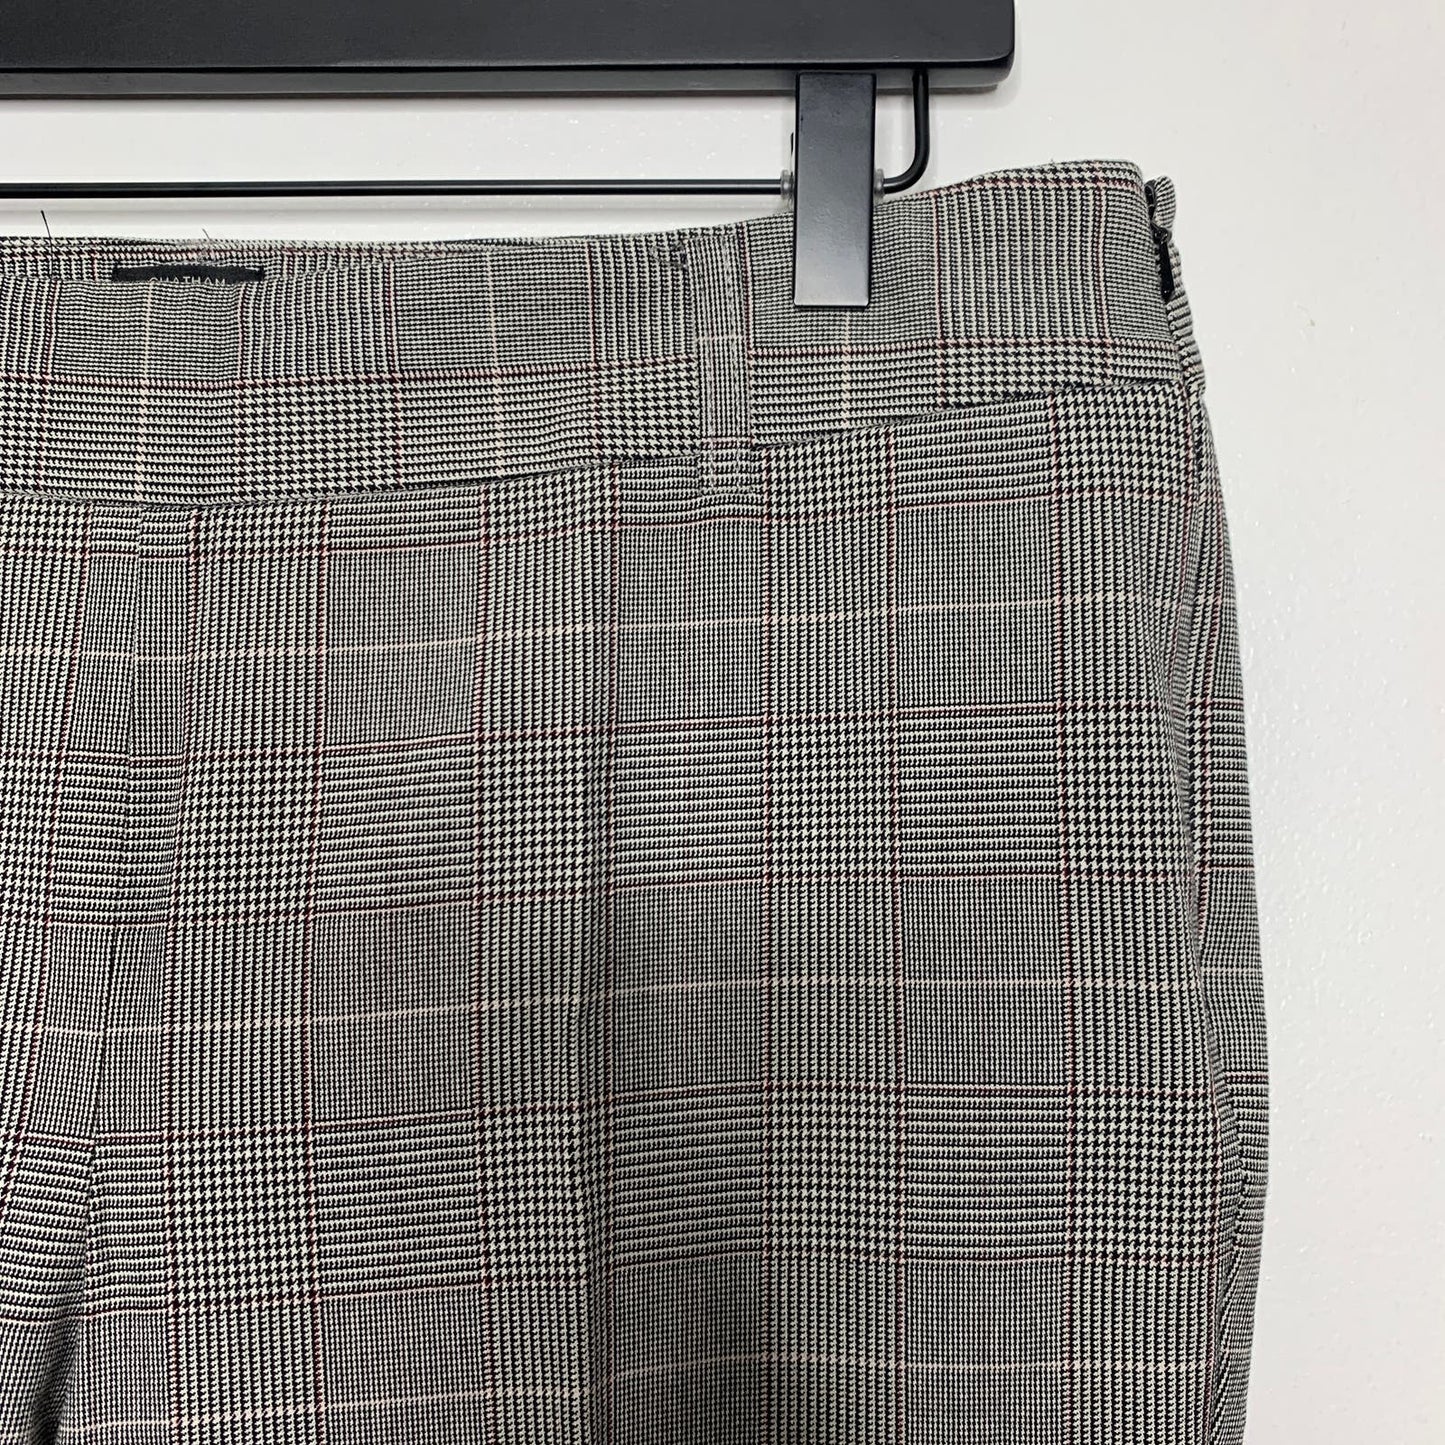 Chatham houndstooth trouser pants SZ 12 PETITE